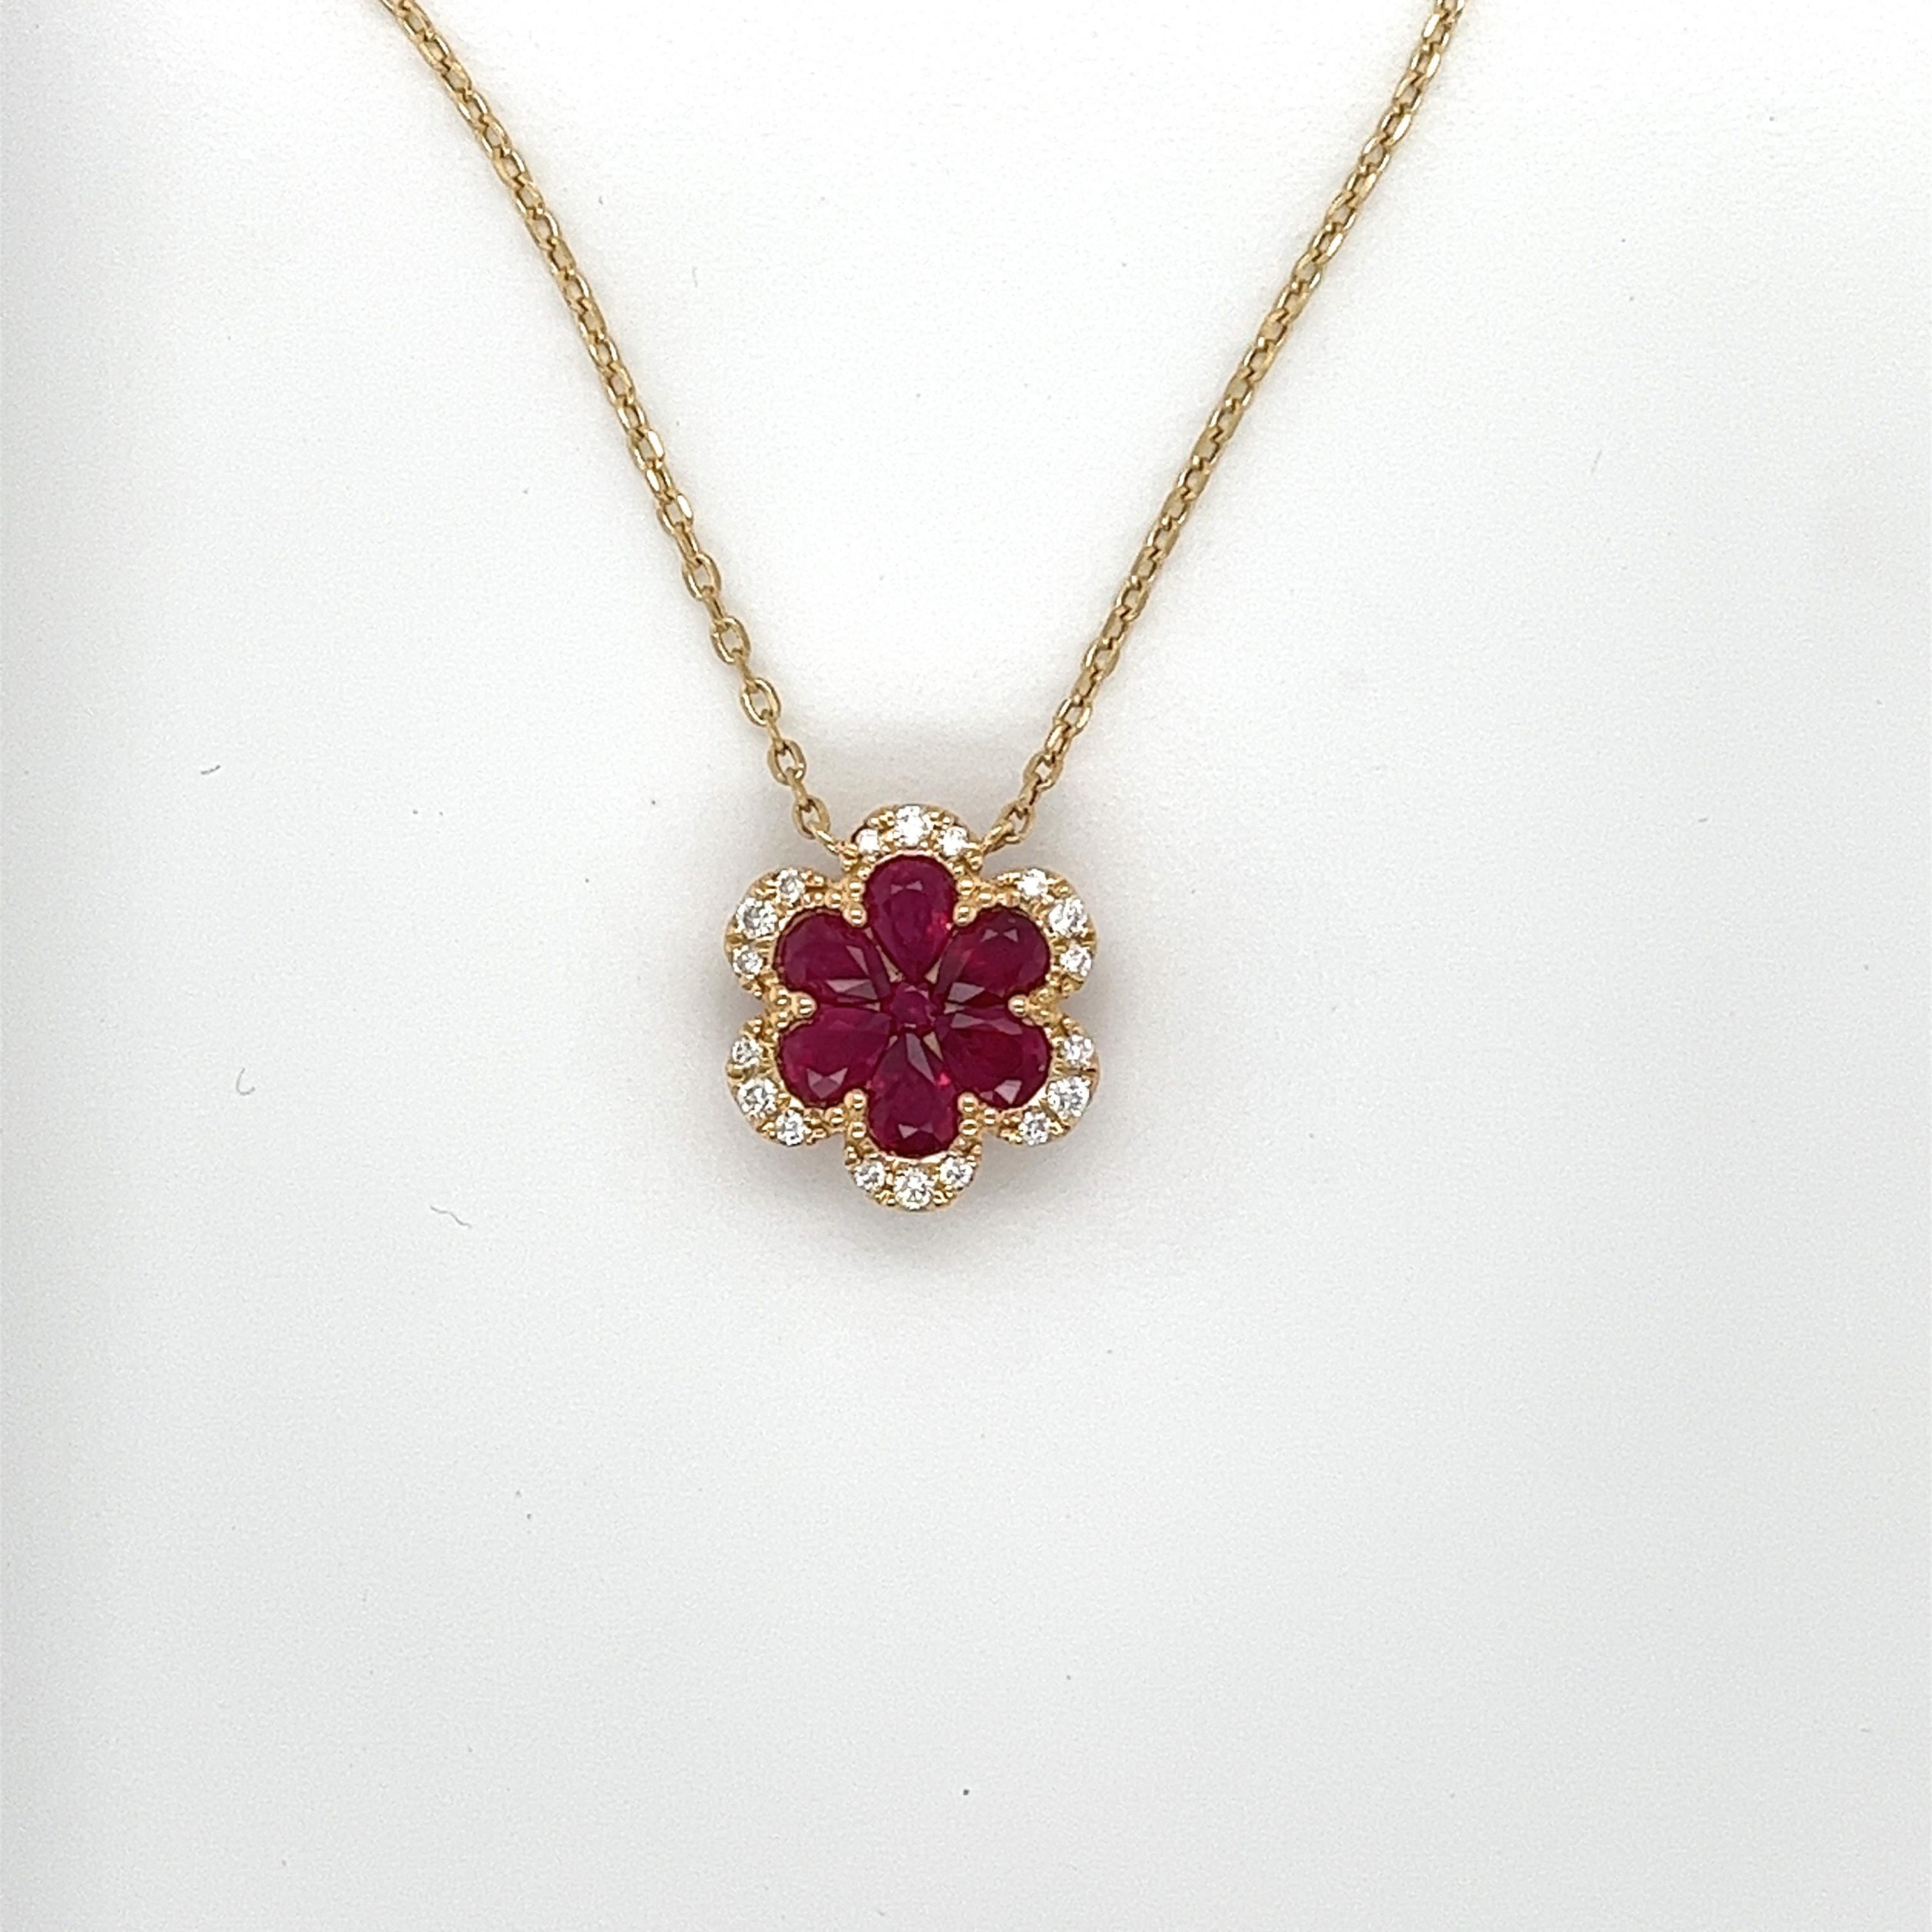 6 pear shape rubies weighing 1.06 cts
1 round ruby weighing .04 cts
18 round diamonds weighing .13 cts
H-SI
Set in 18k yellow gold
2.63 g
Adjustable 16-18 in yellow gold chain